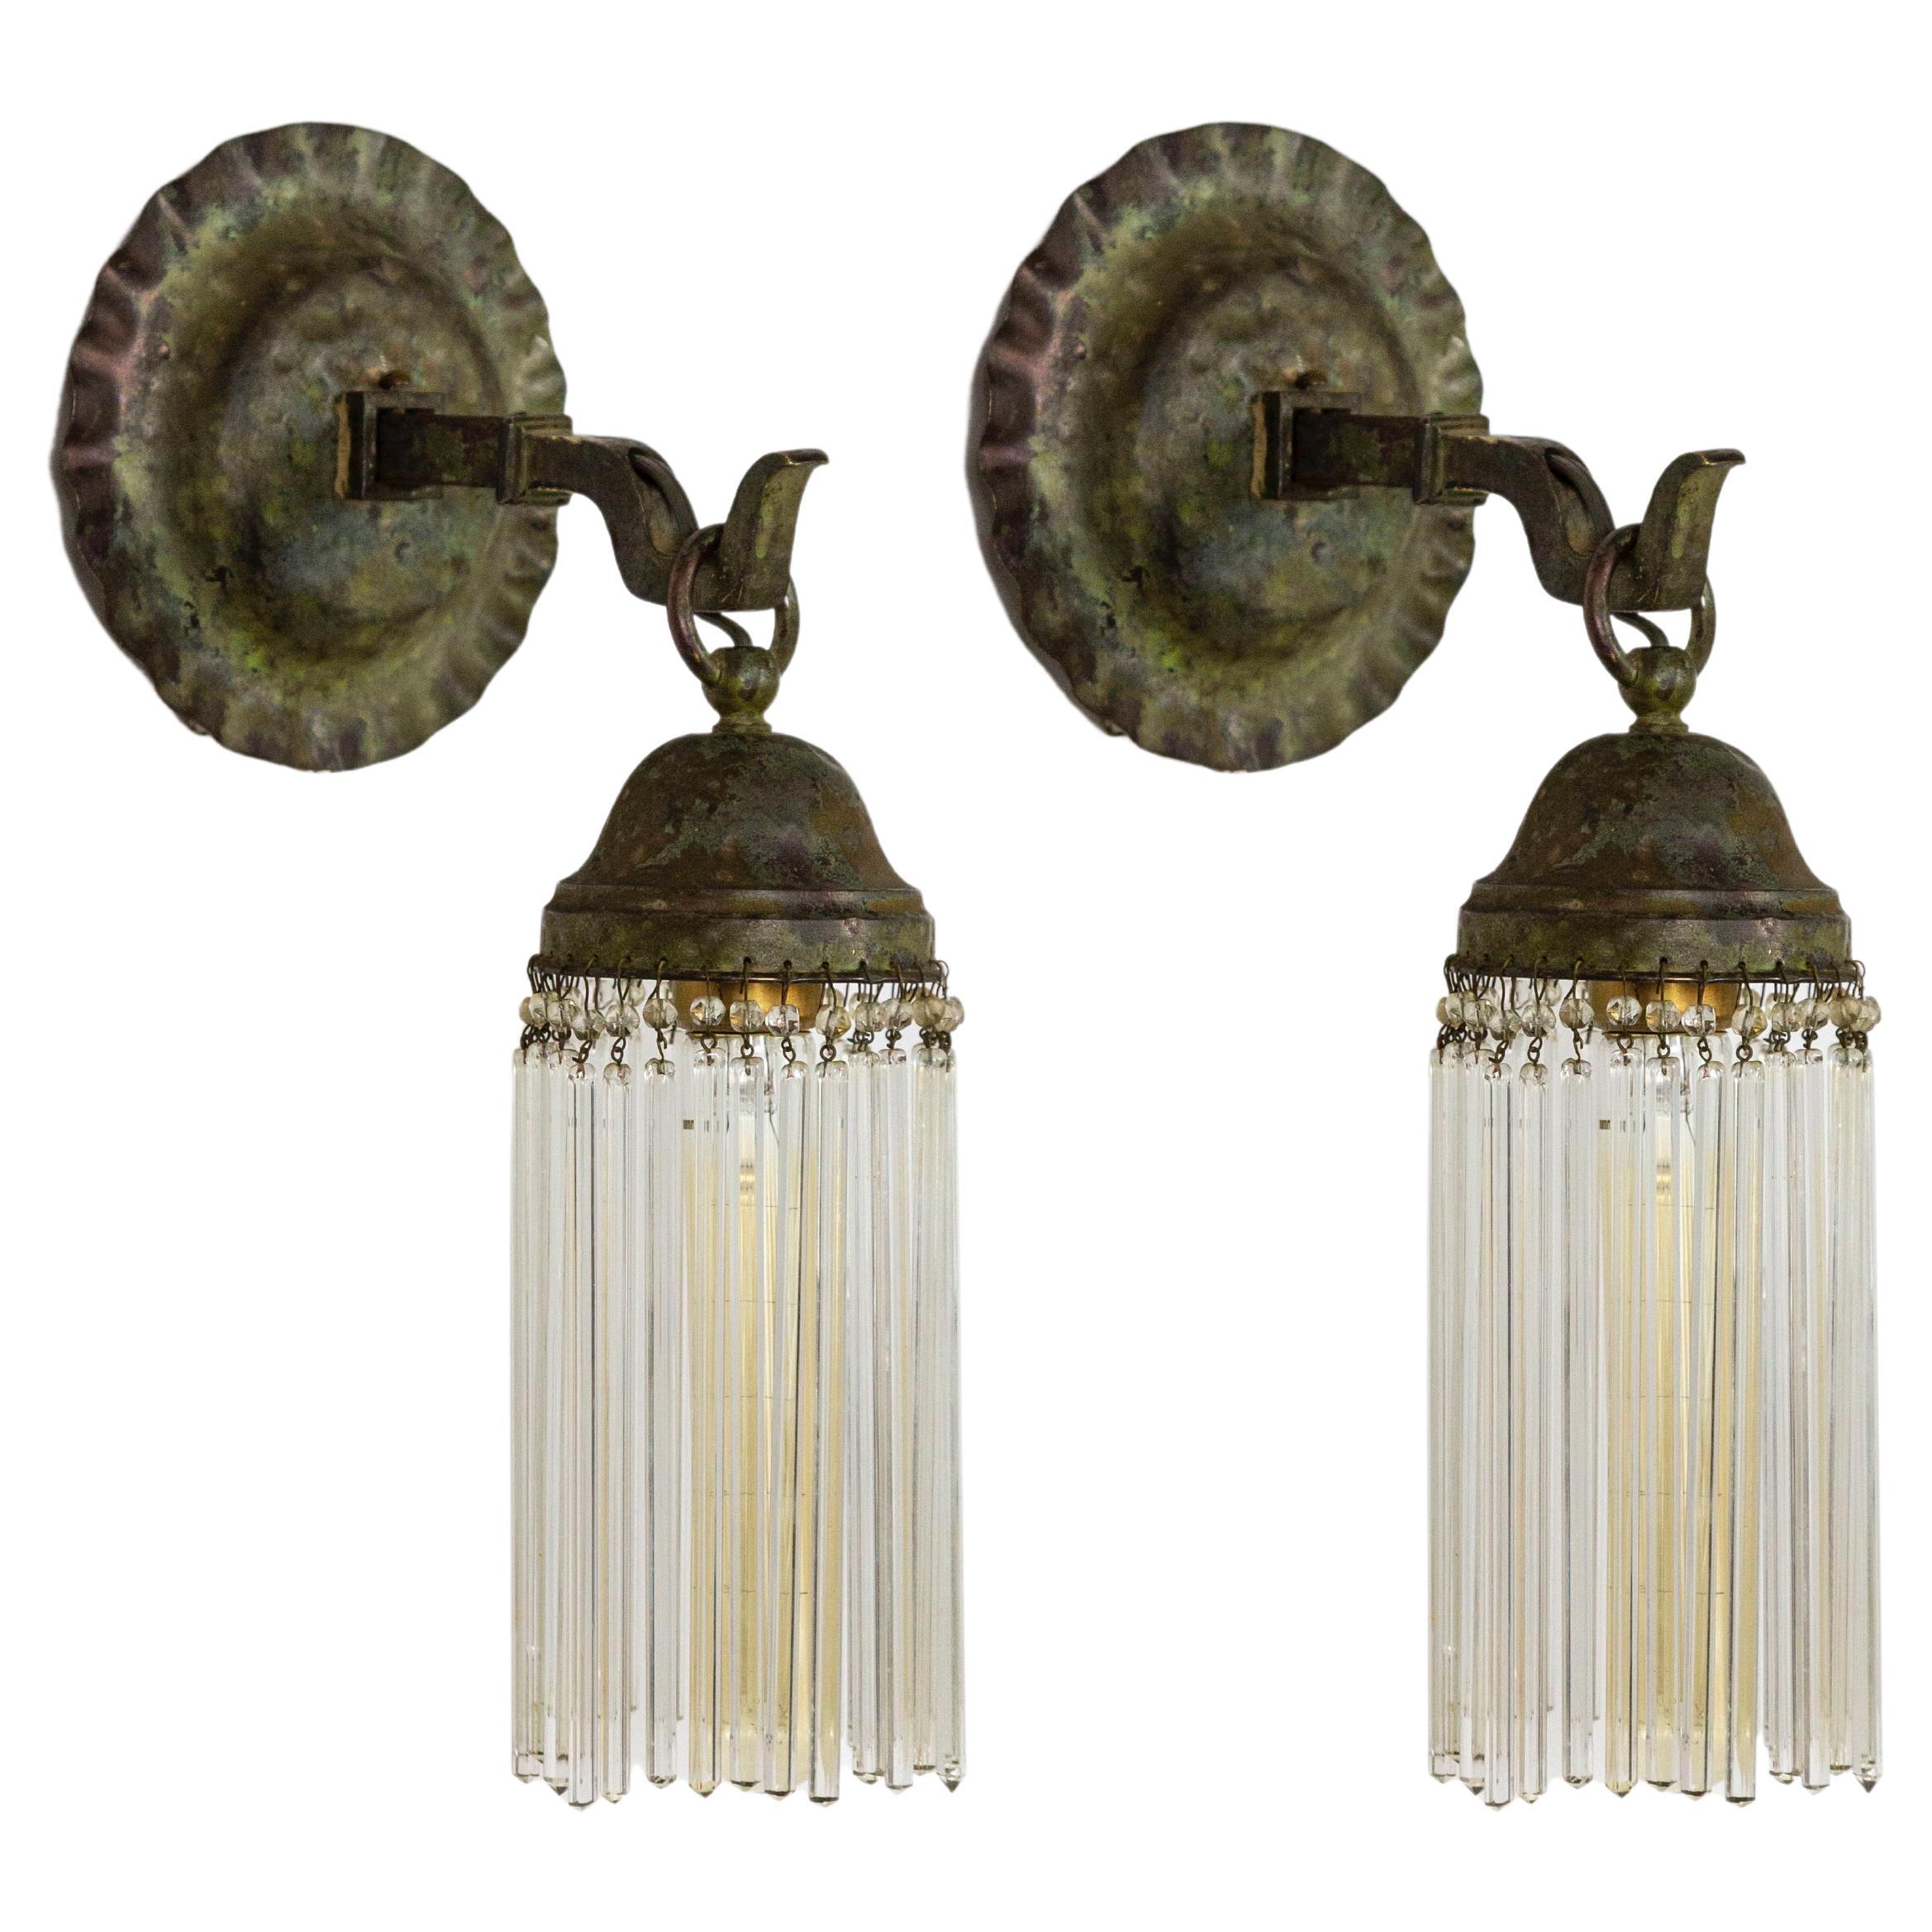 Pair of Transitional Wall Sconces with Art Nouveau and Arts & Crafts Styling